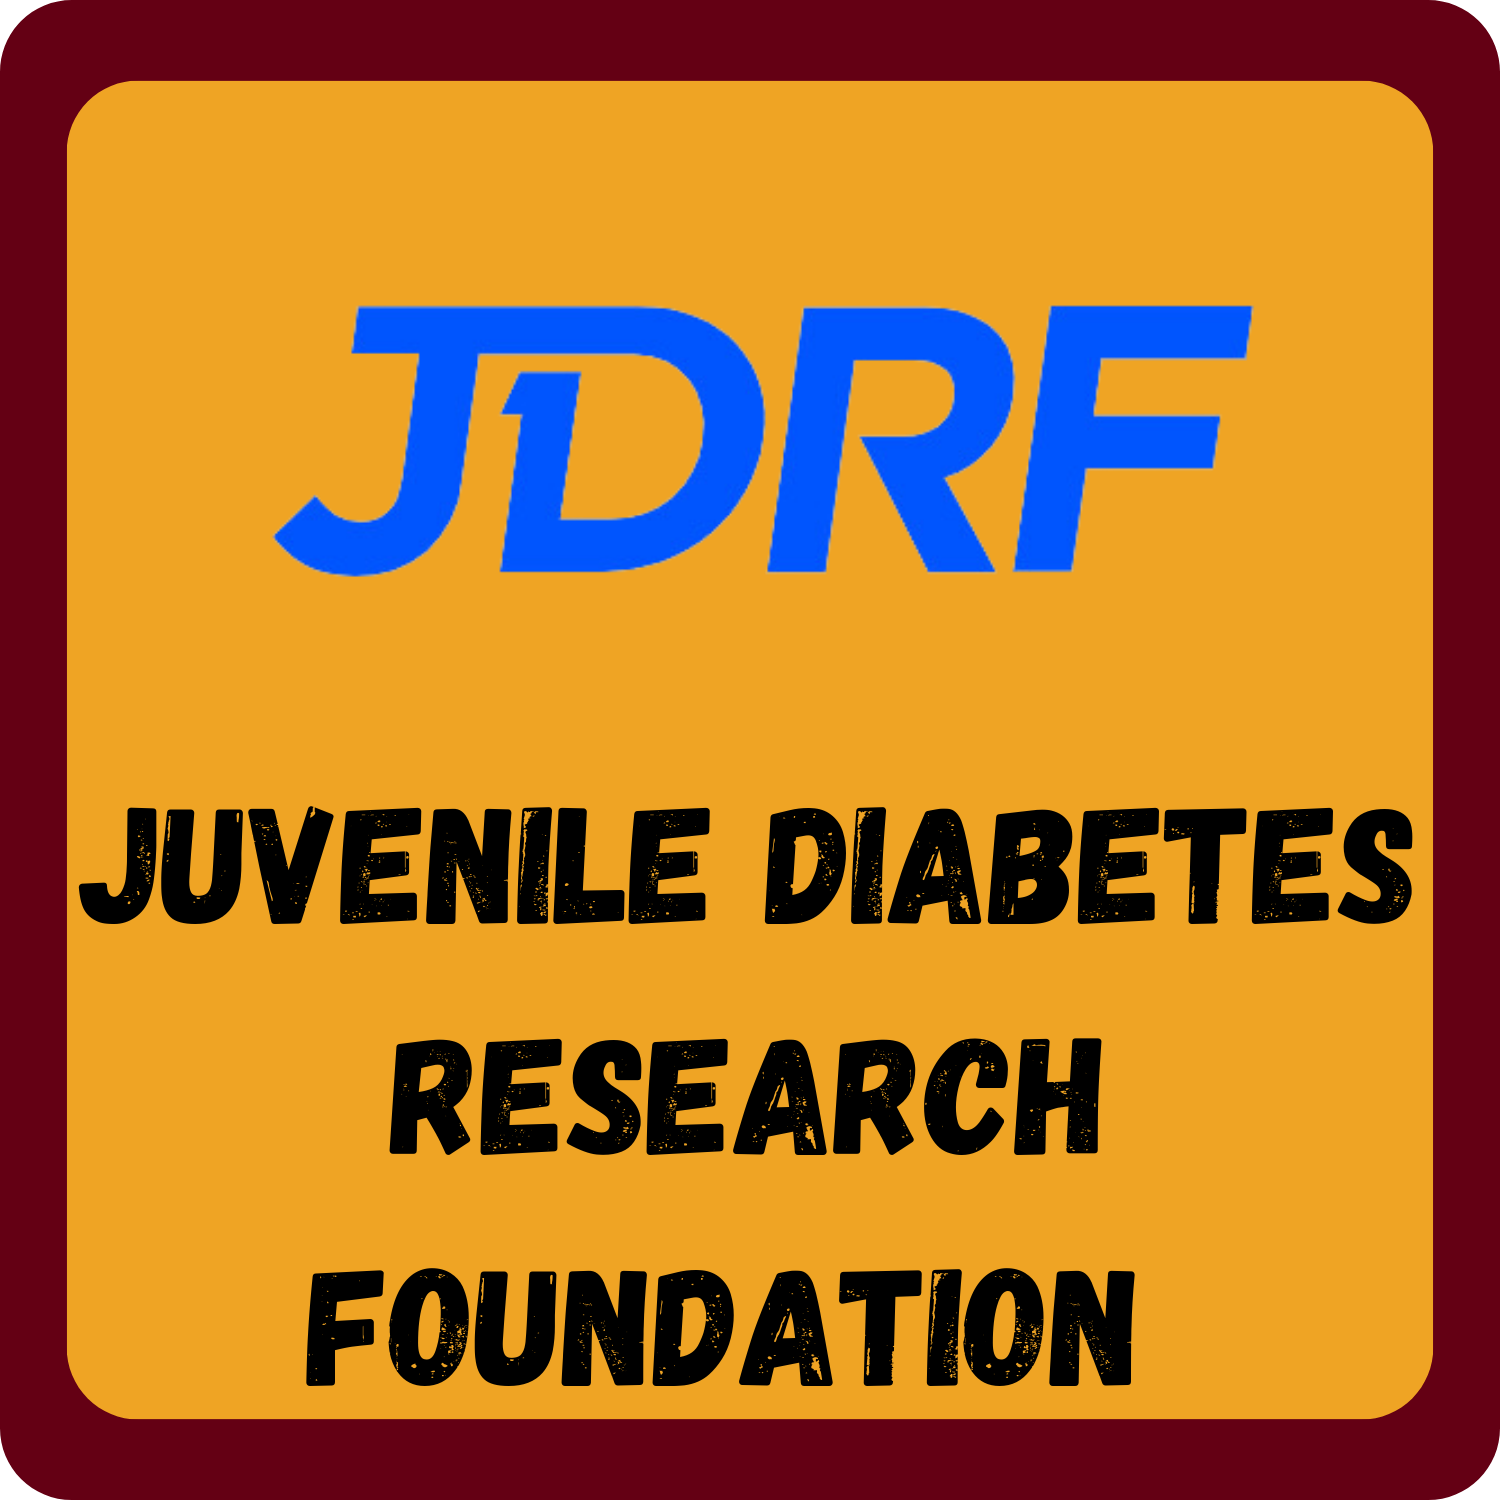 JDRF Juvenile Diabetes Research Foundation (new site opens in new tab)